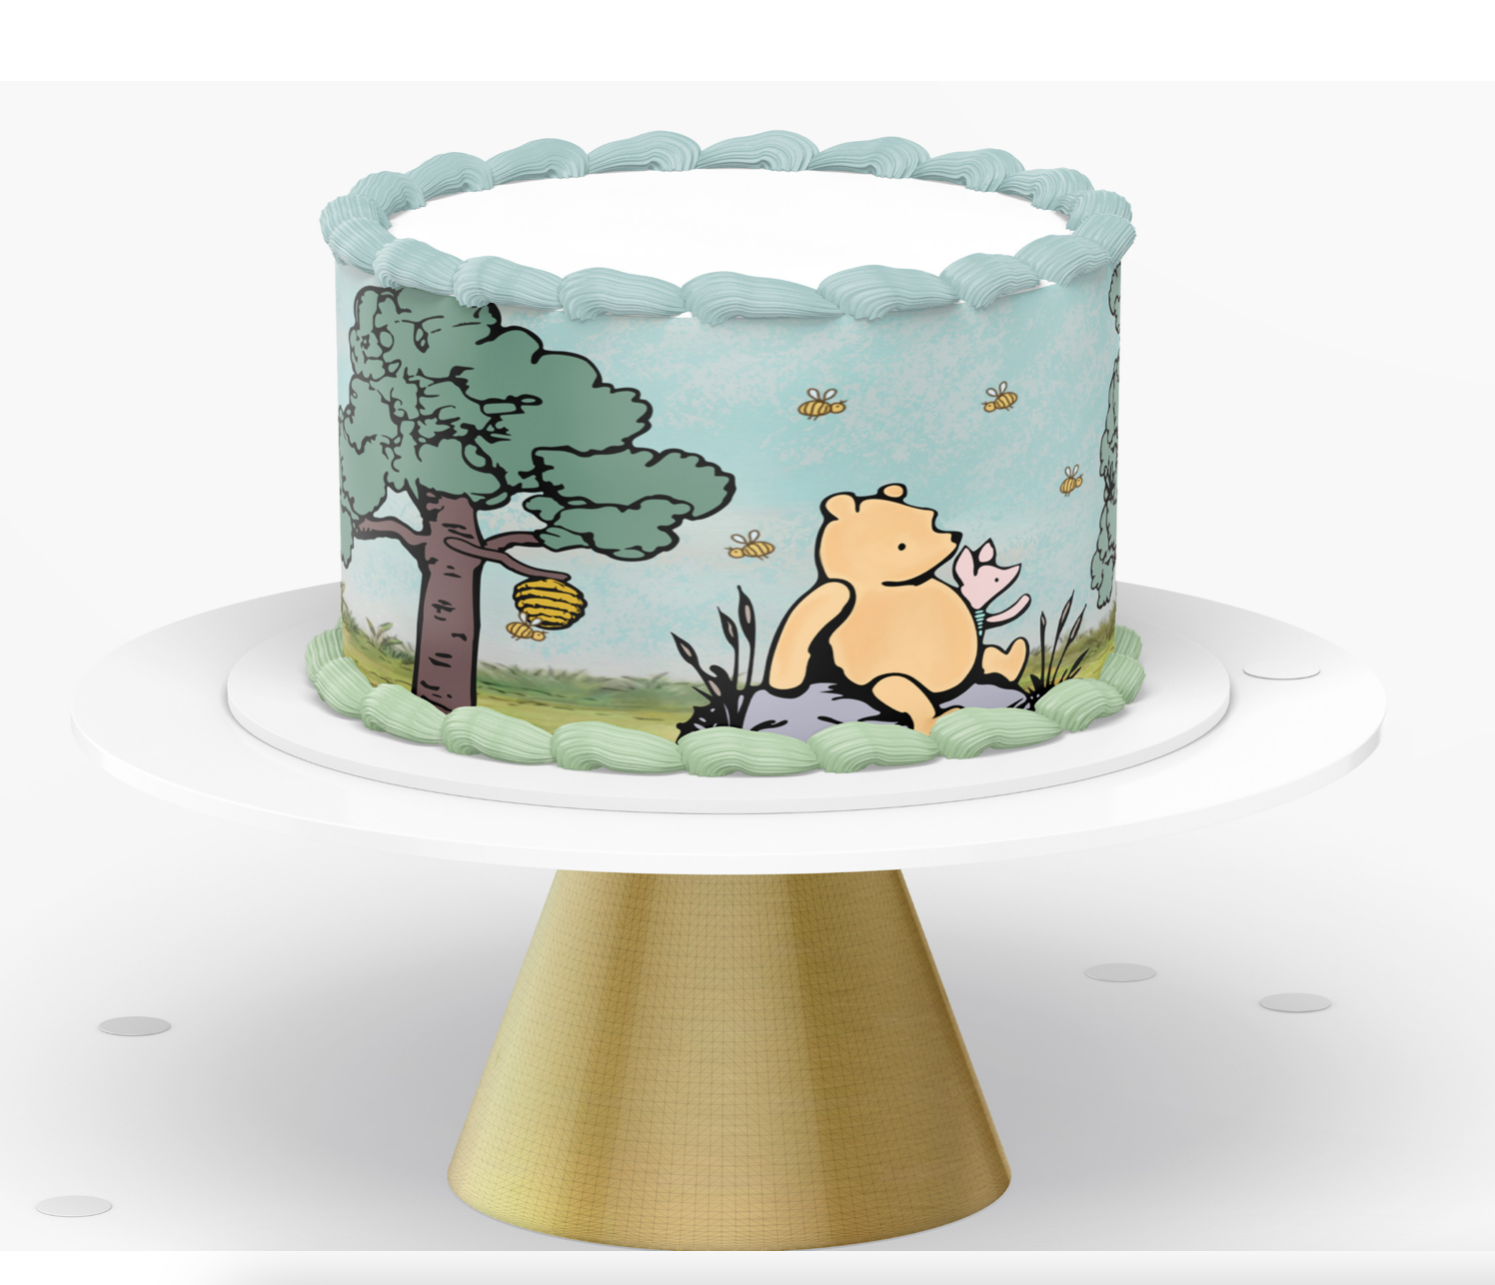 Winnie the Pooh Edible Cake Topper Image Strips 